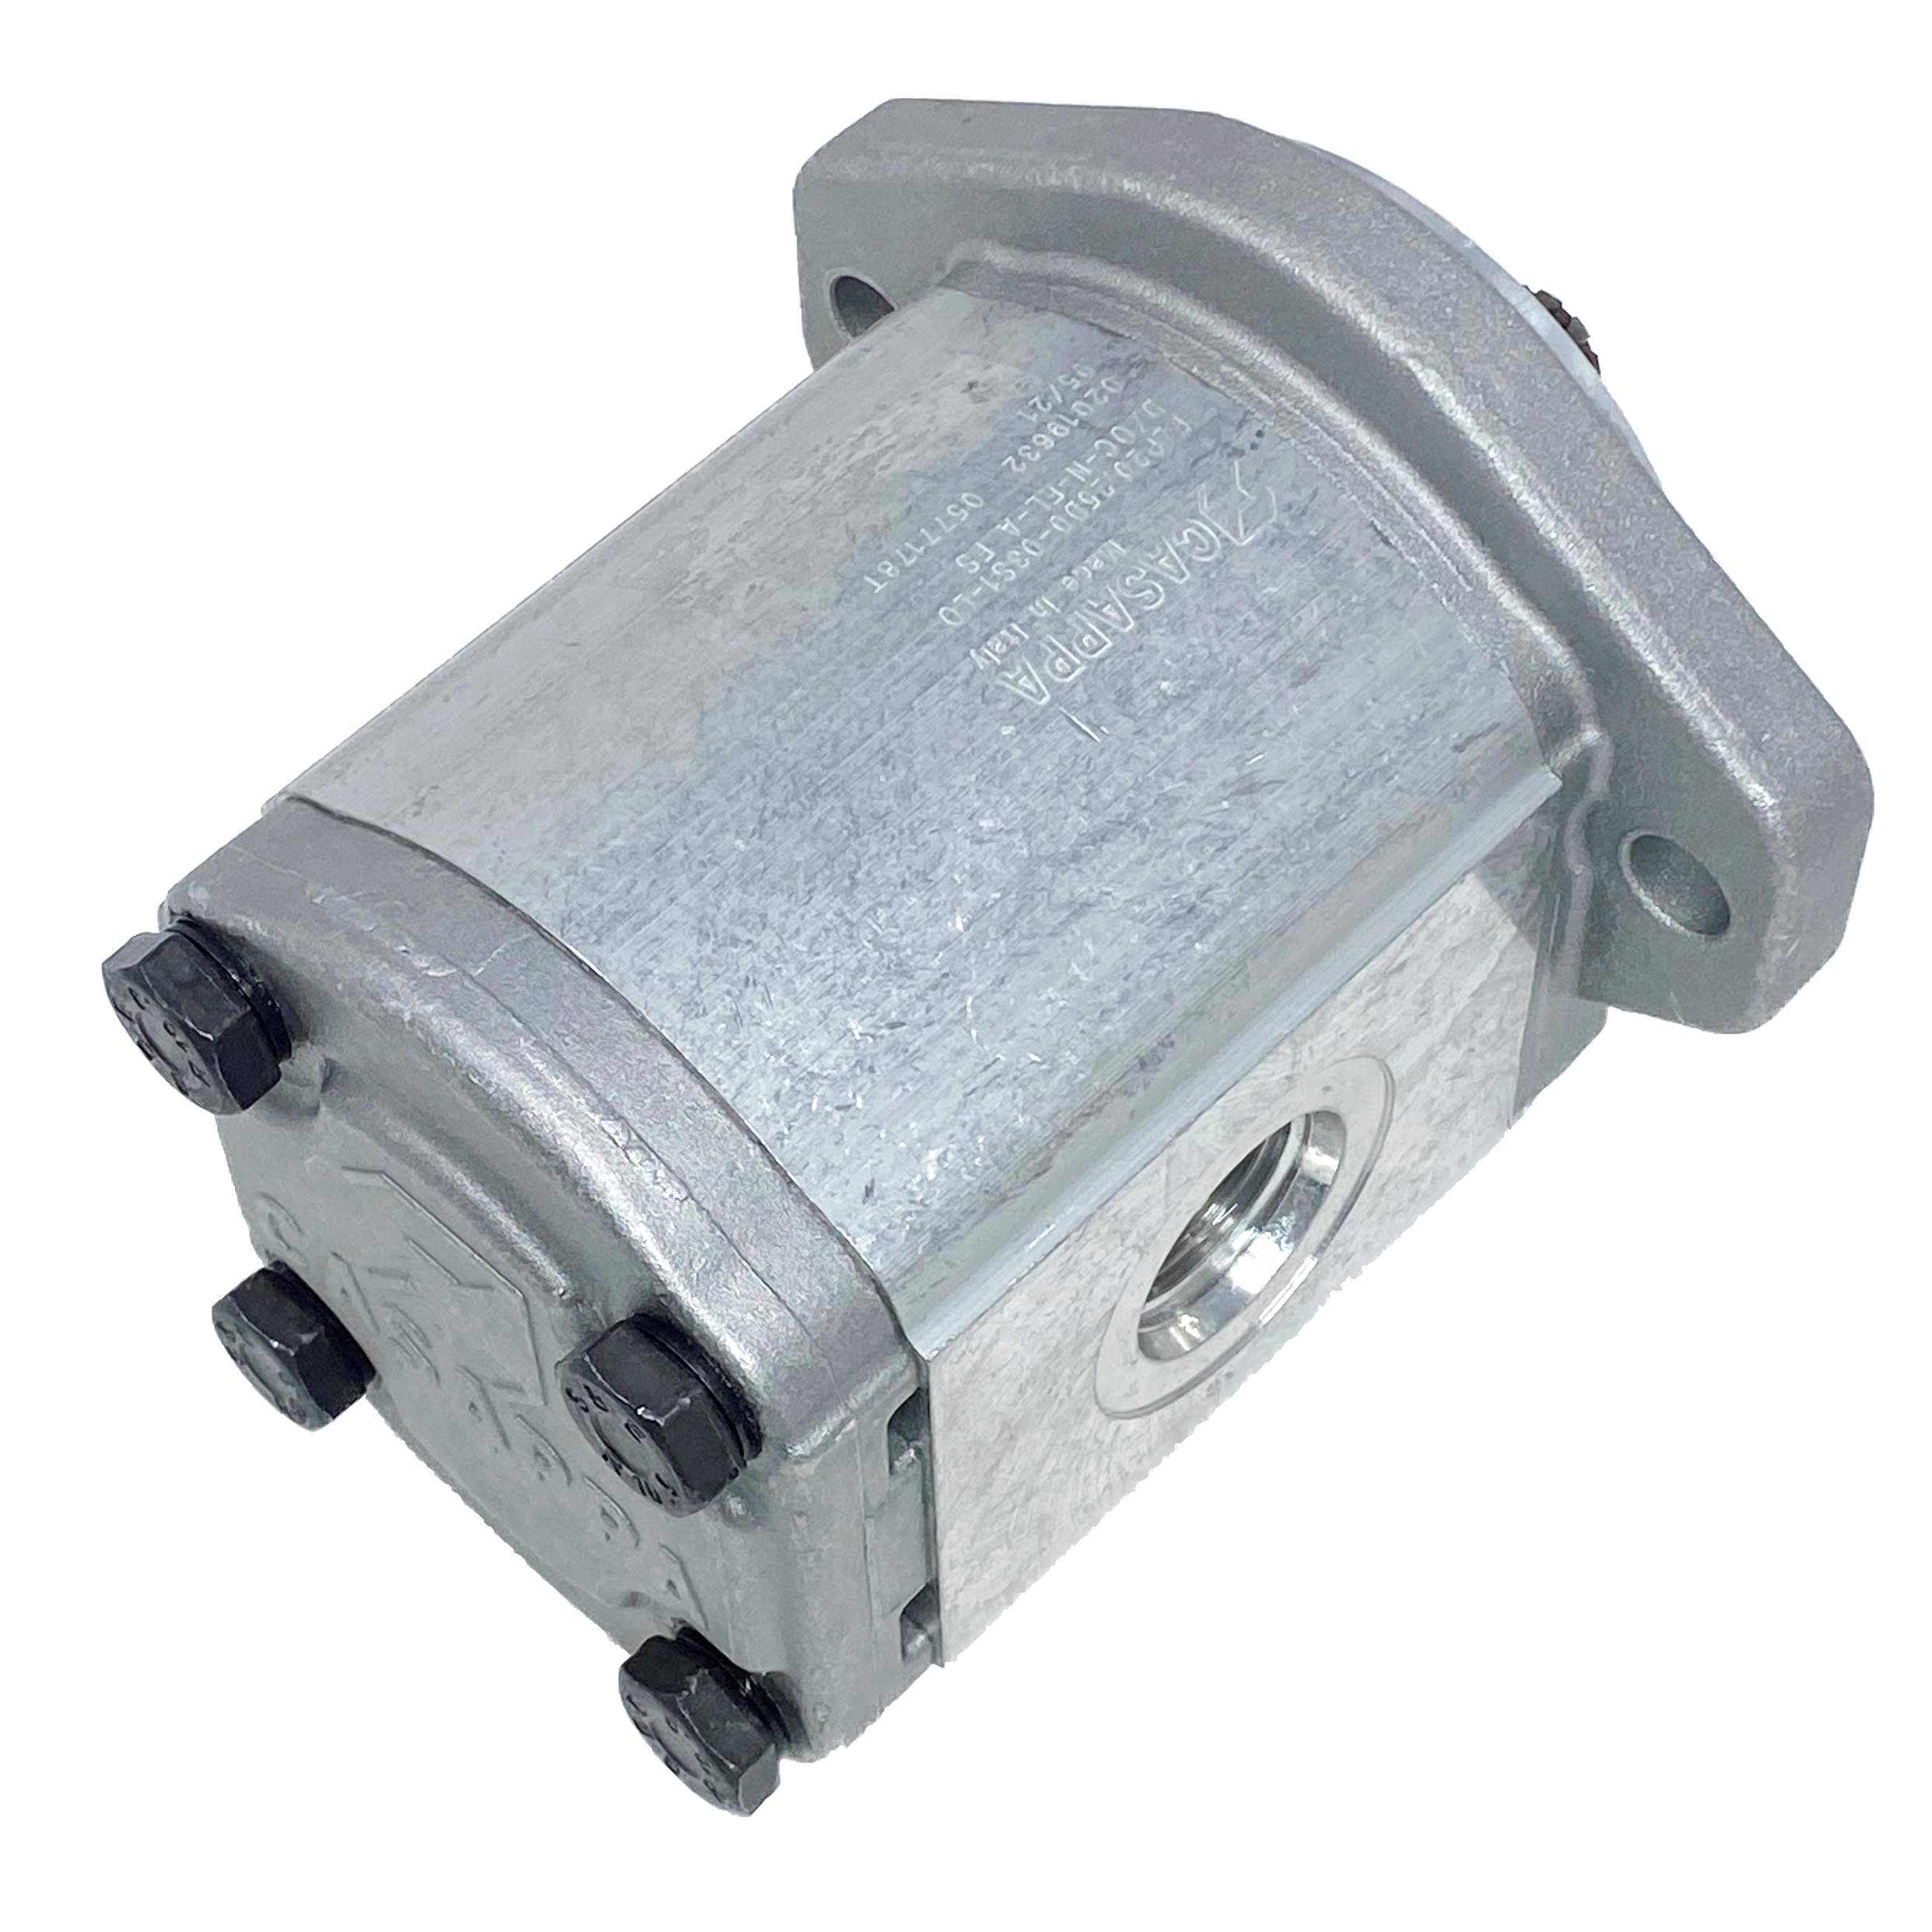 PHM20.27,8B0-07S9-LOC/OG-N-EL : Casappa Polaris Gear Motor, 28.21cc, 2900psi Rated, 2500RPM, Reversible Interior Drain, 11T 16/32dp Shaft, SAE A 2-Bolt Flange, 0.625 (5/8") #10 SAE Inlet, 1.25" #20 SAE Outlet, Cast Iron Body, Aluminum Flange